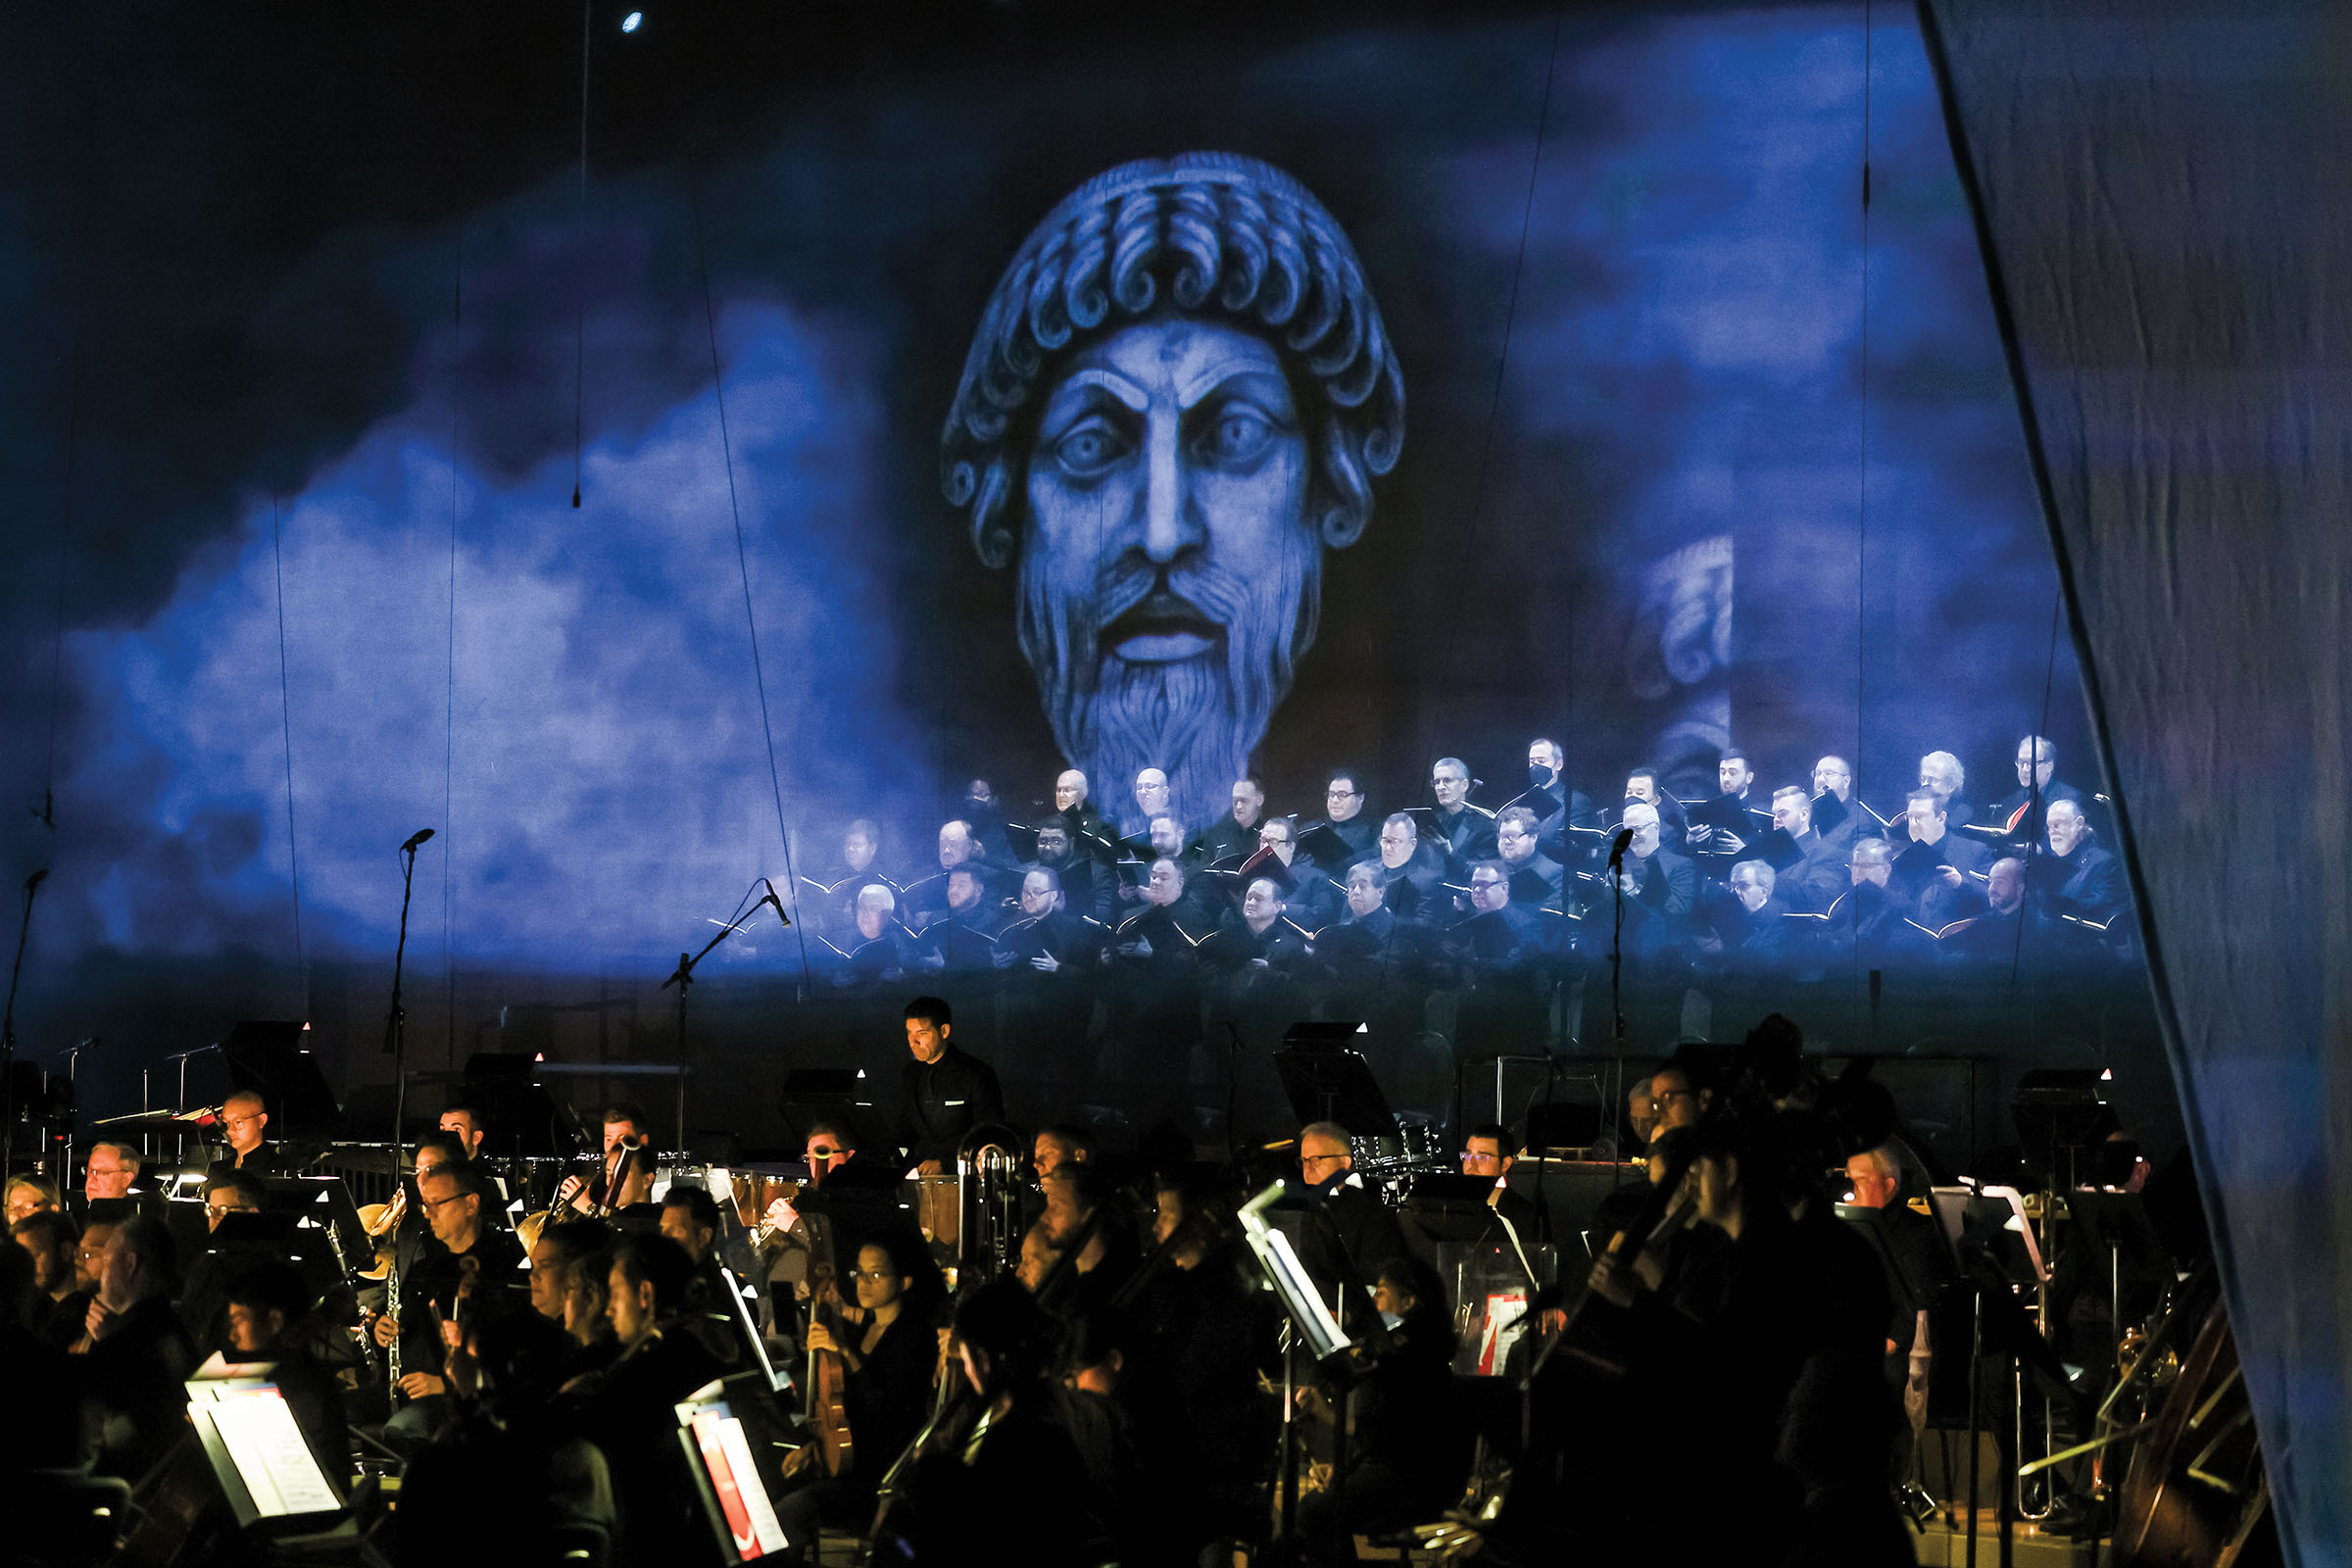 A large group of musicians play under a smoky blue projected image of a Roman sculpture